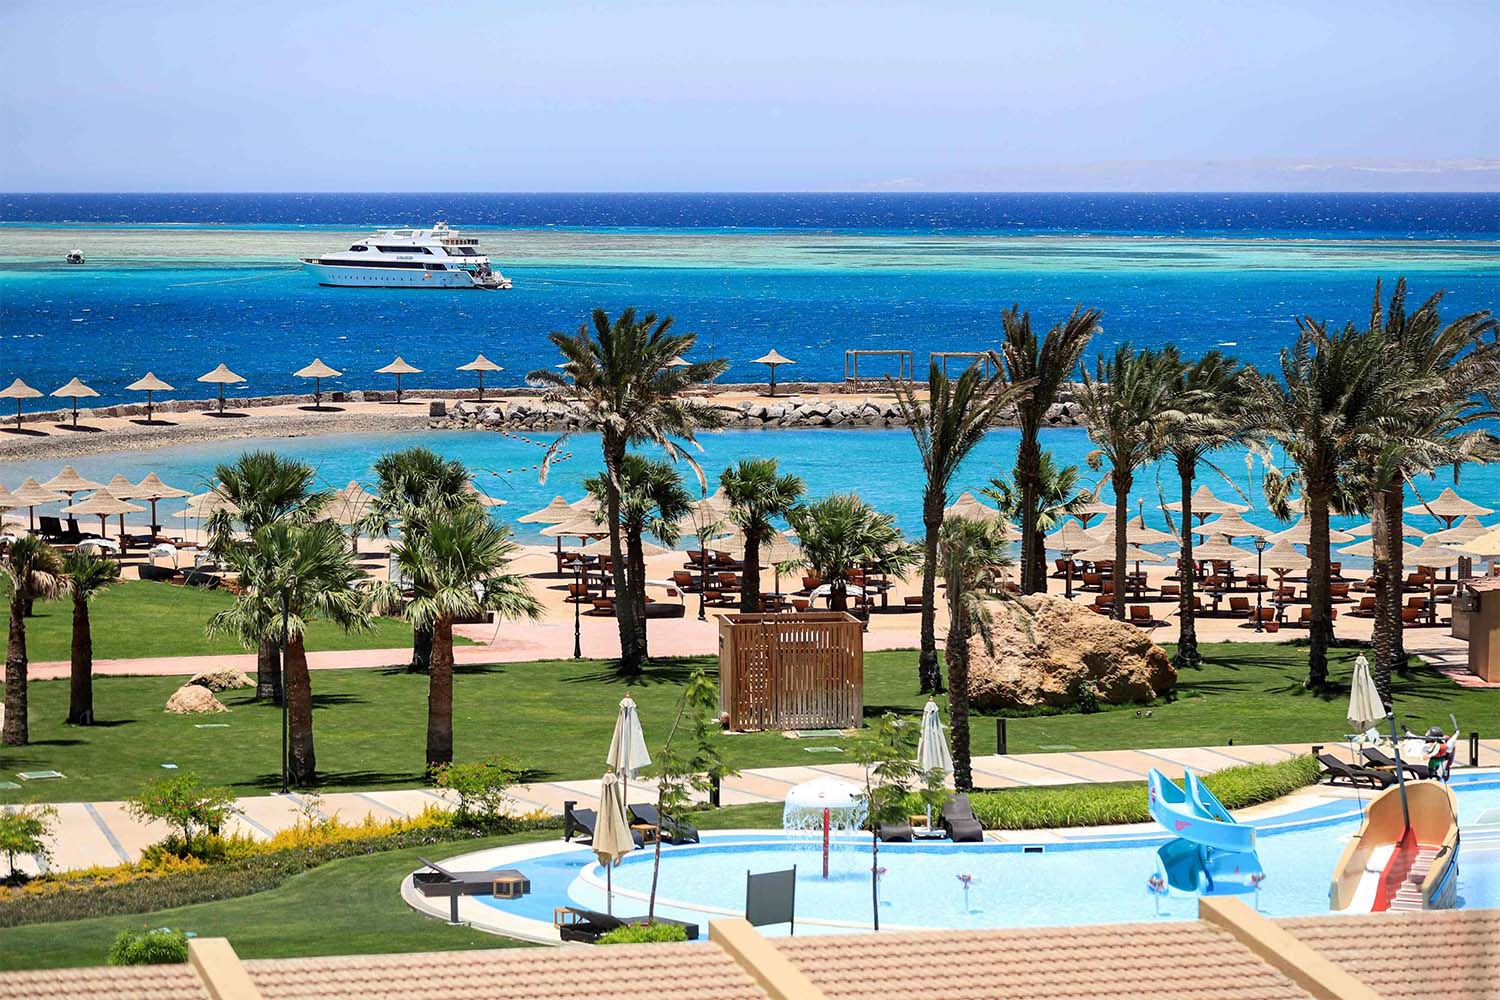 Egyptian hotels had been running at 70% of capacity since July due to COVID-19 regulations